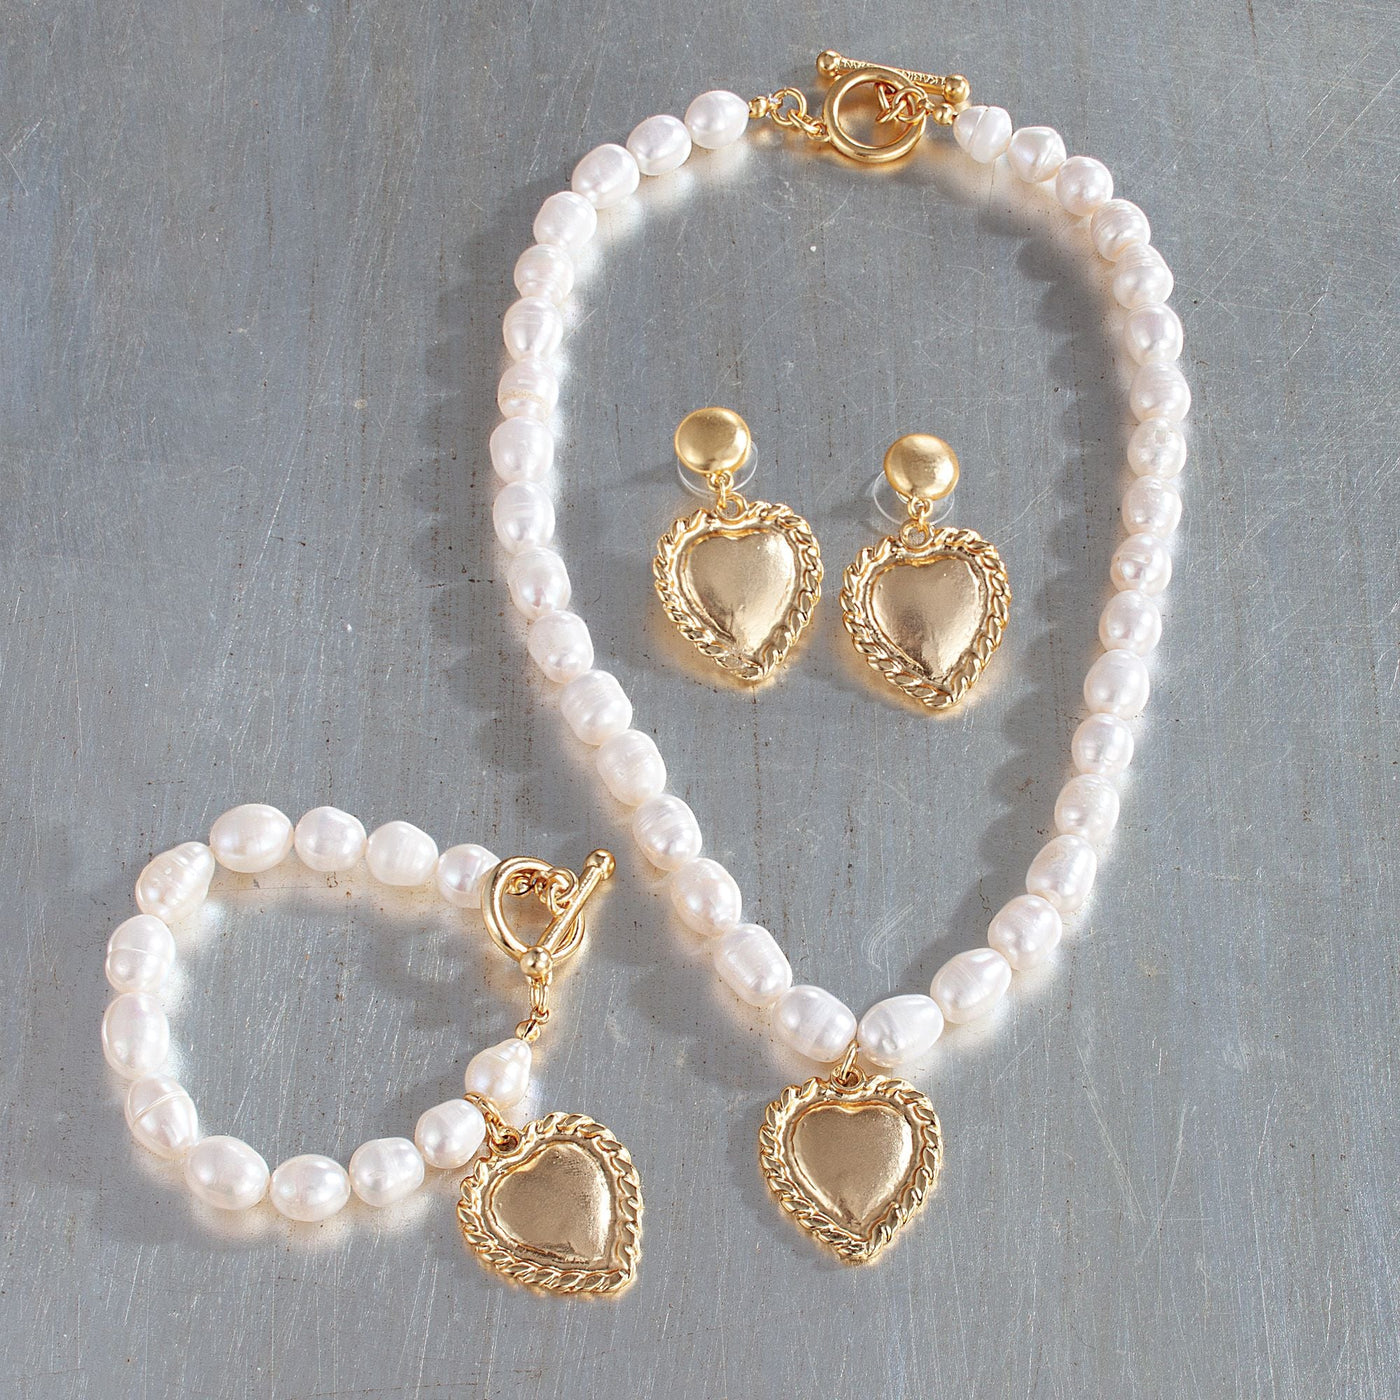 Golden Hearts Necklace